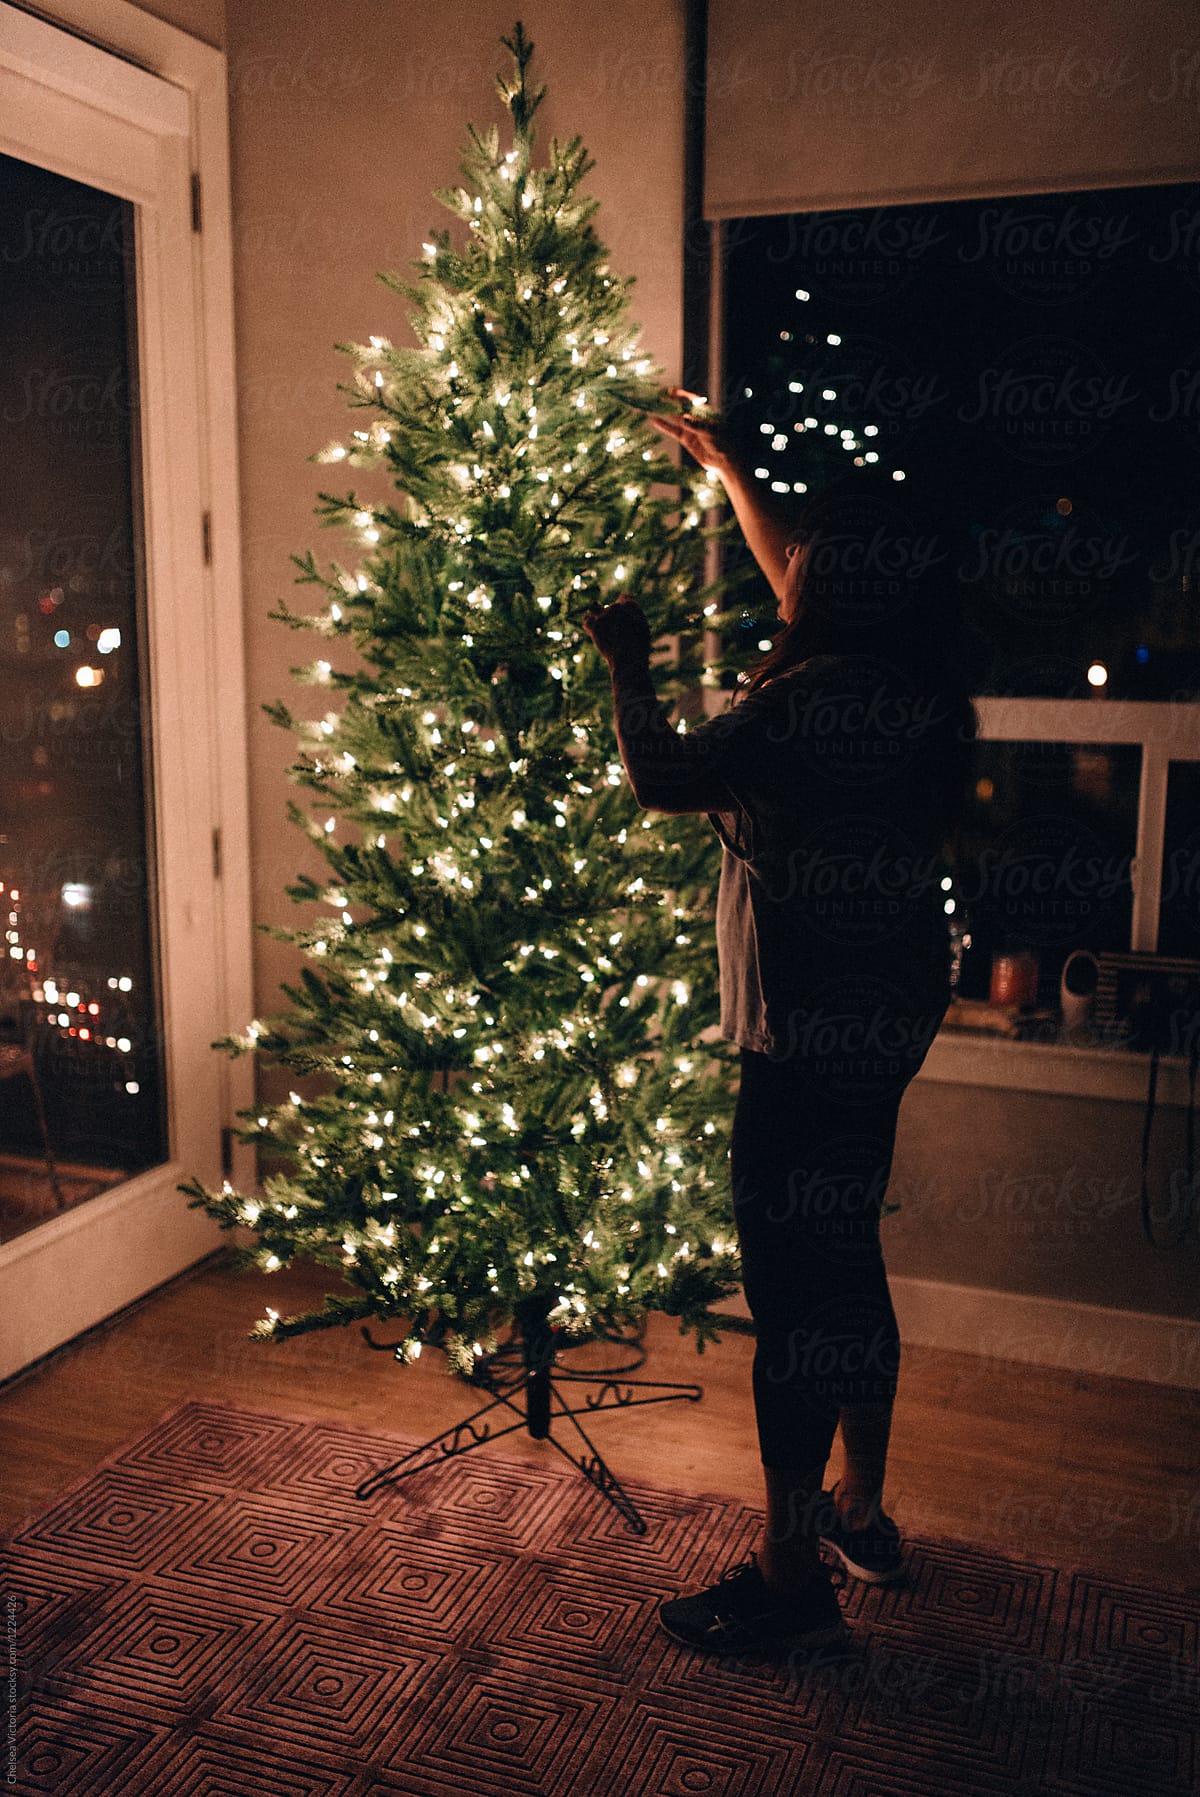 A woman decorating her Christmas tree